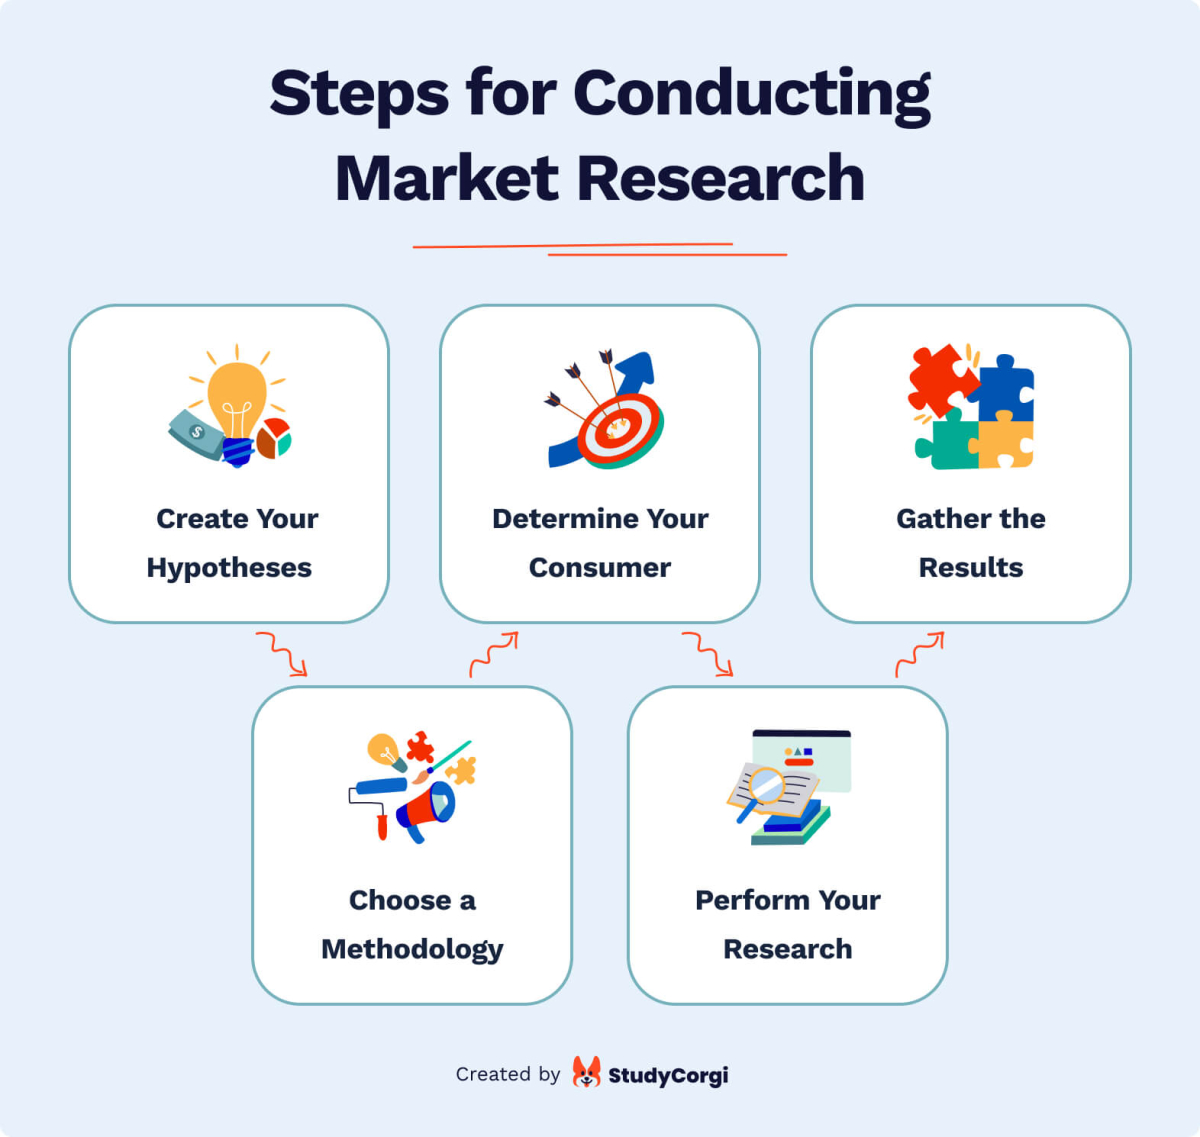 Steps for conducting market research.